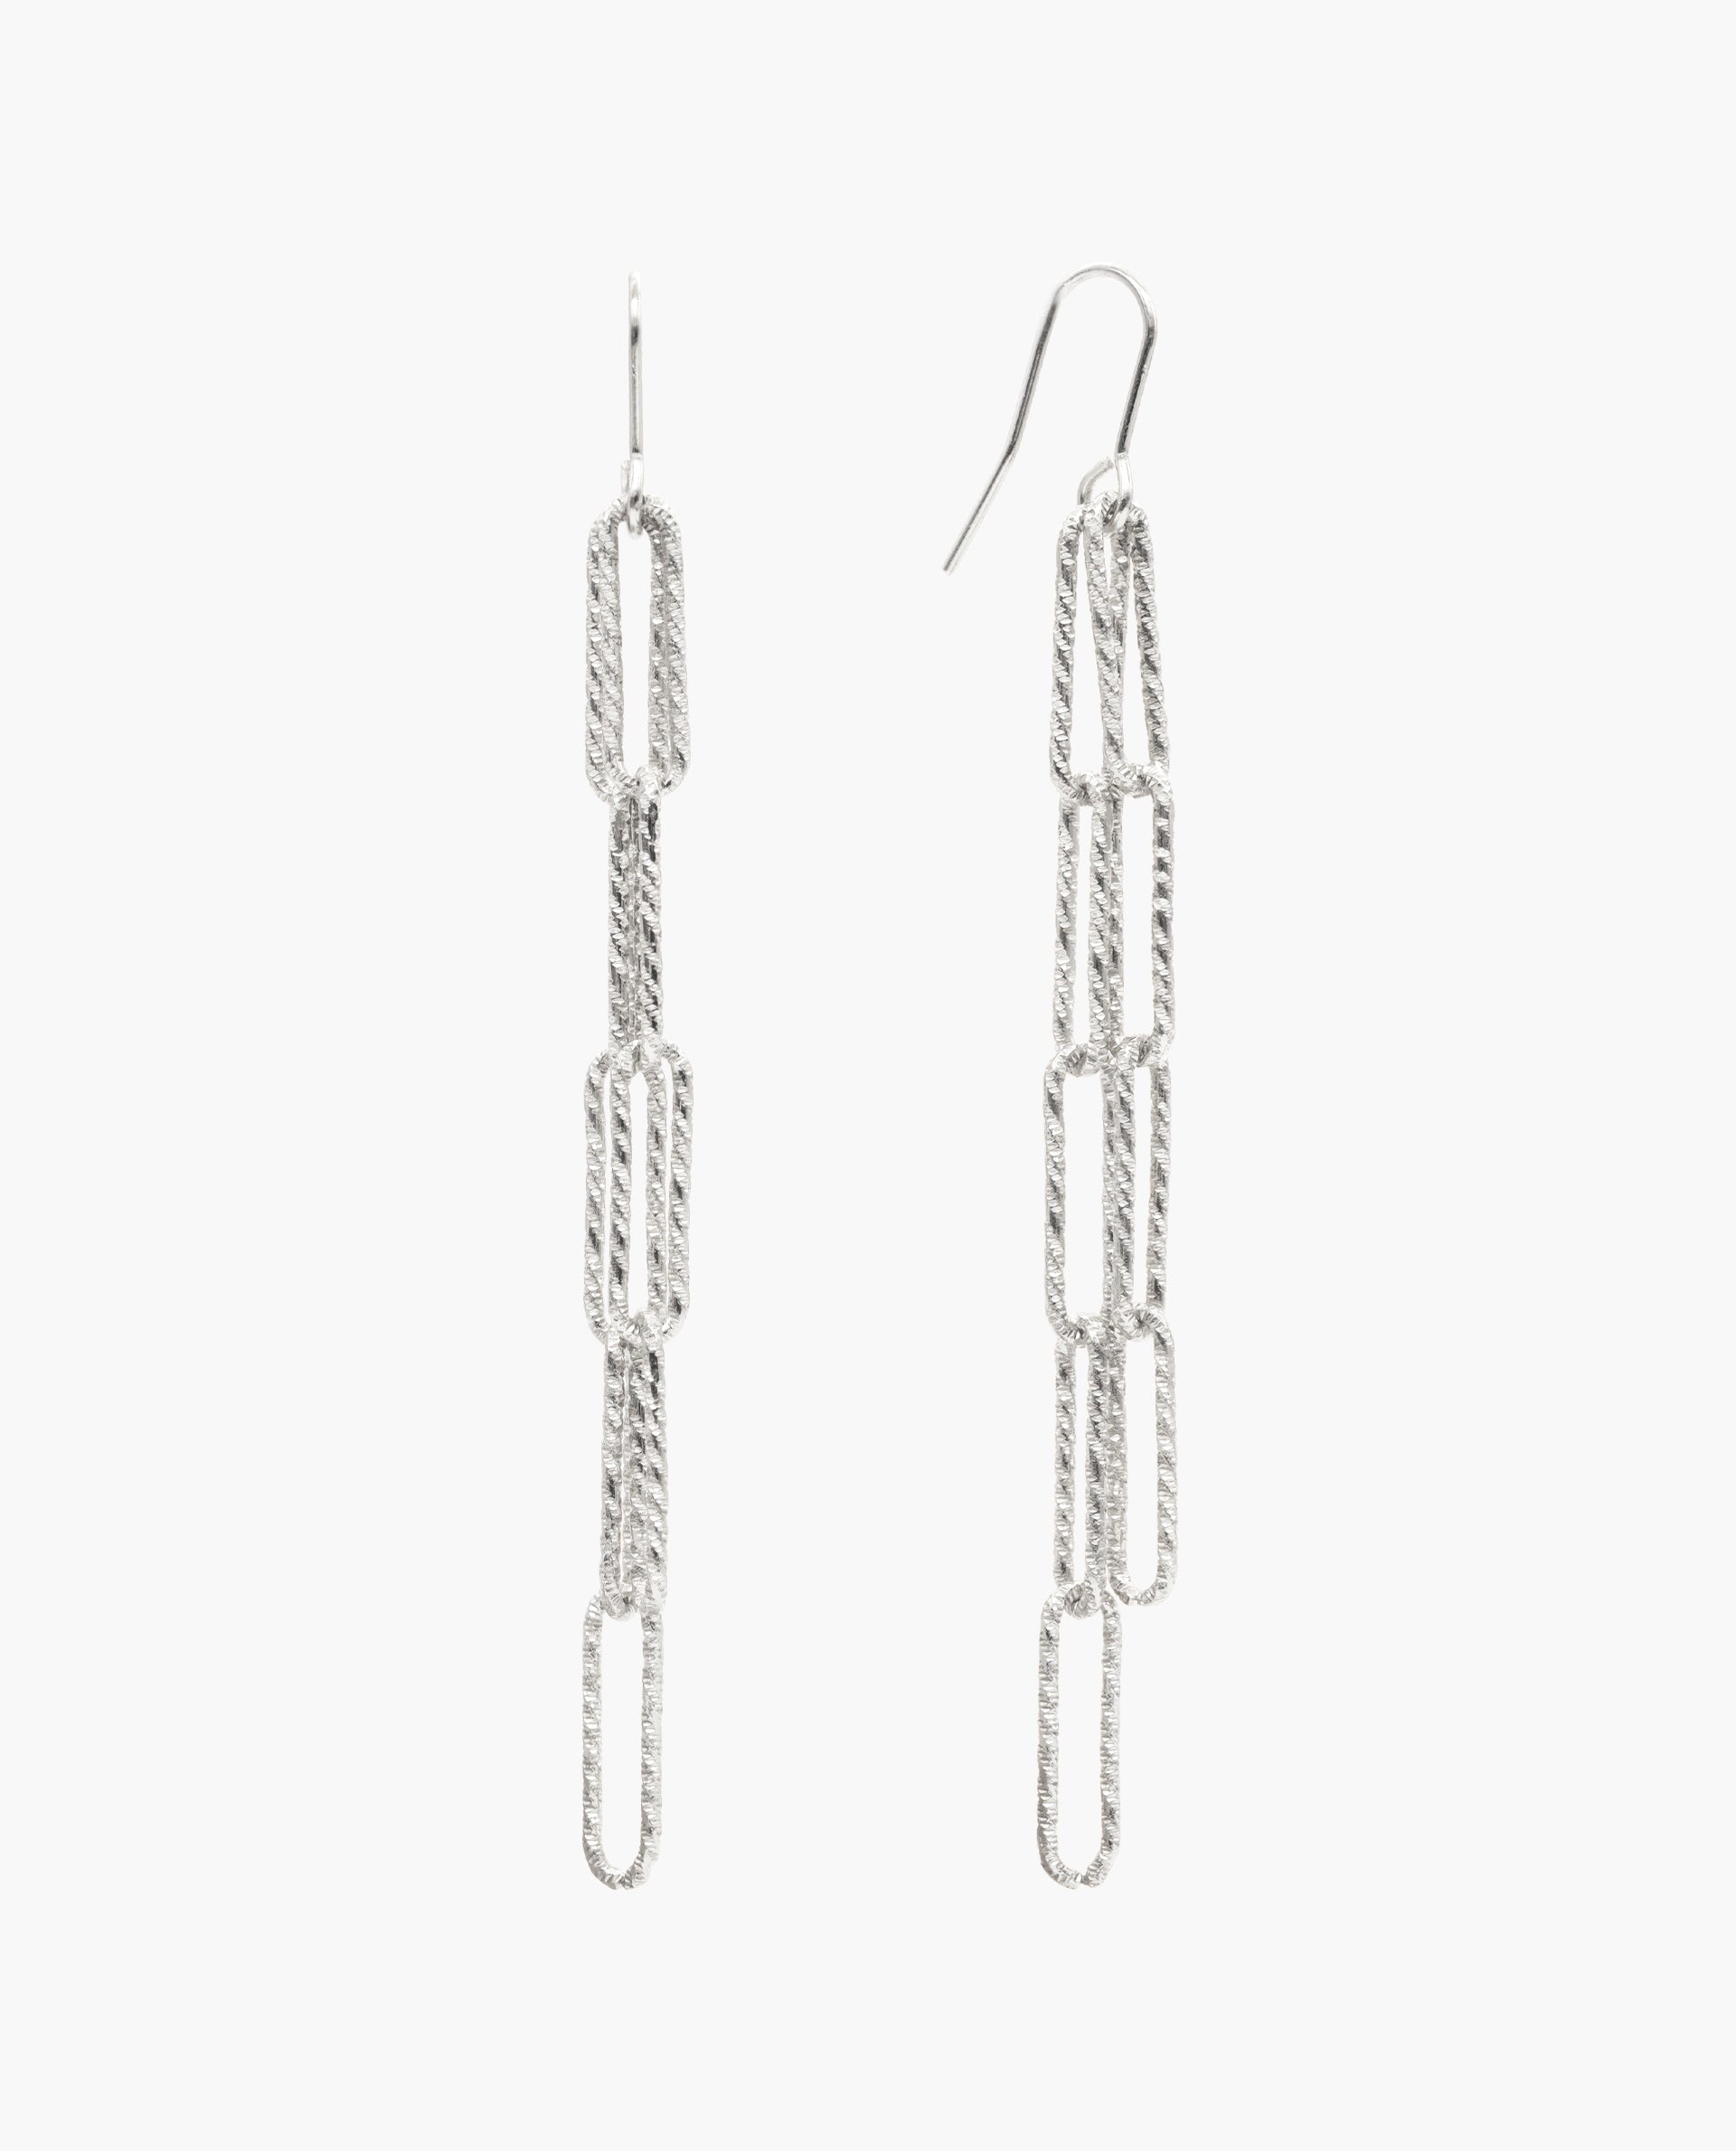 SANDS EARRINGS - SILVER PLATED